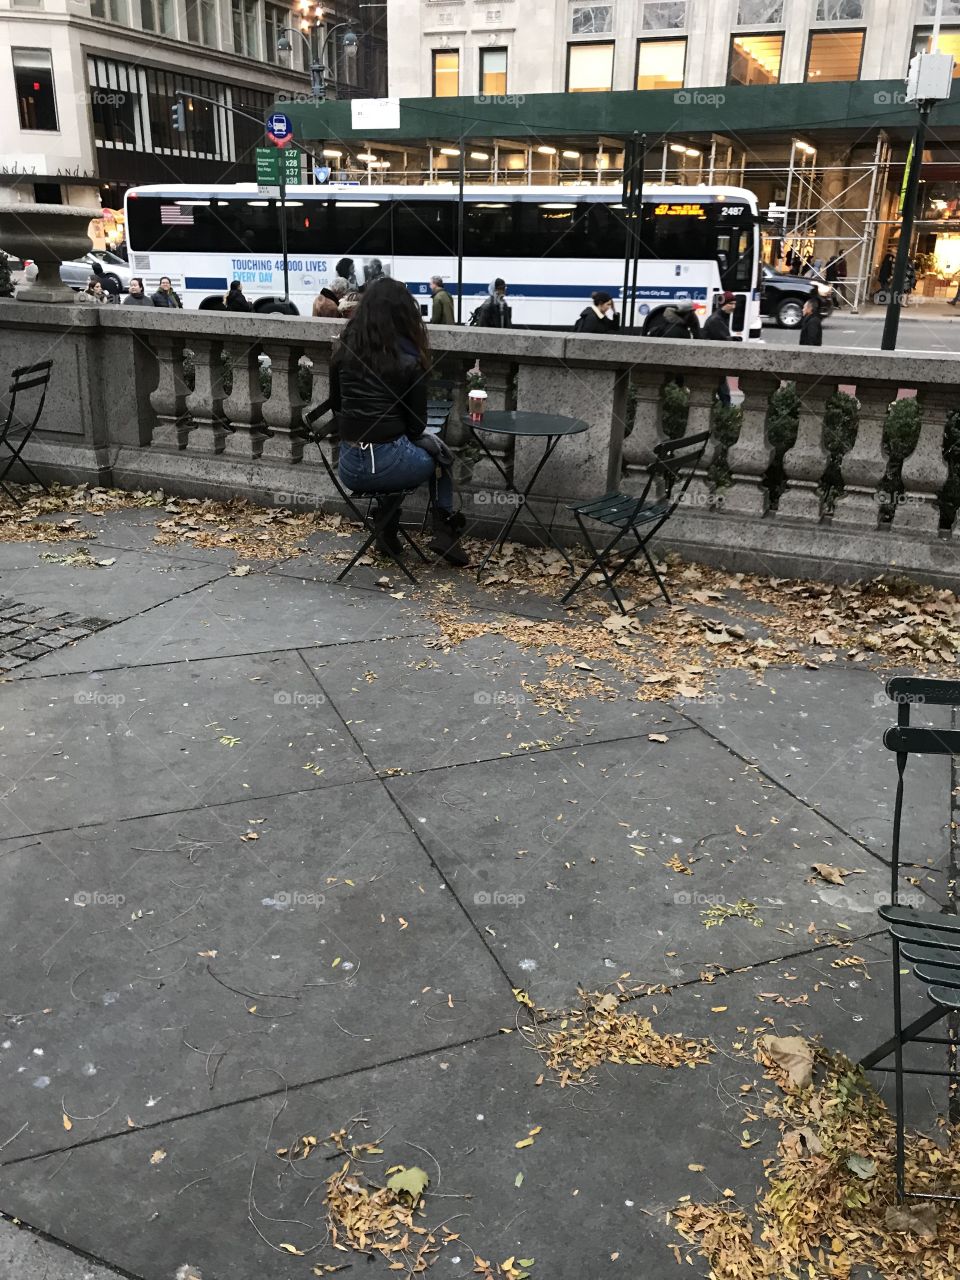 Beautiful girl seated in front of the main branch of the New York Public Library from the rear.